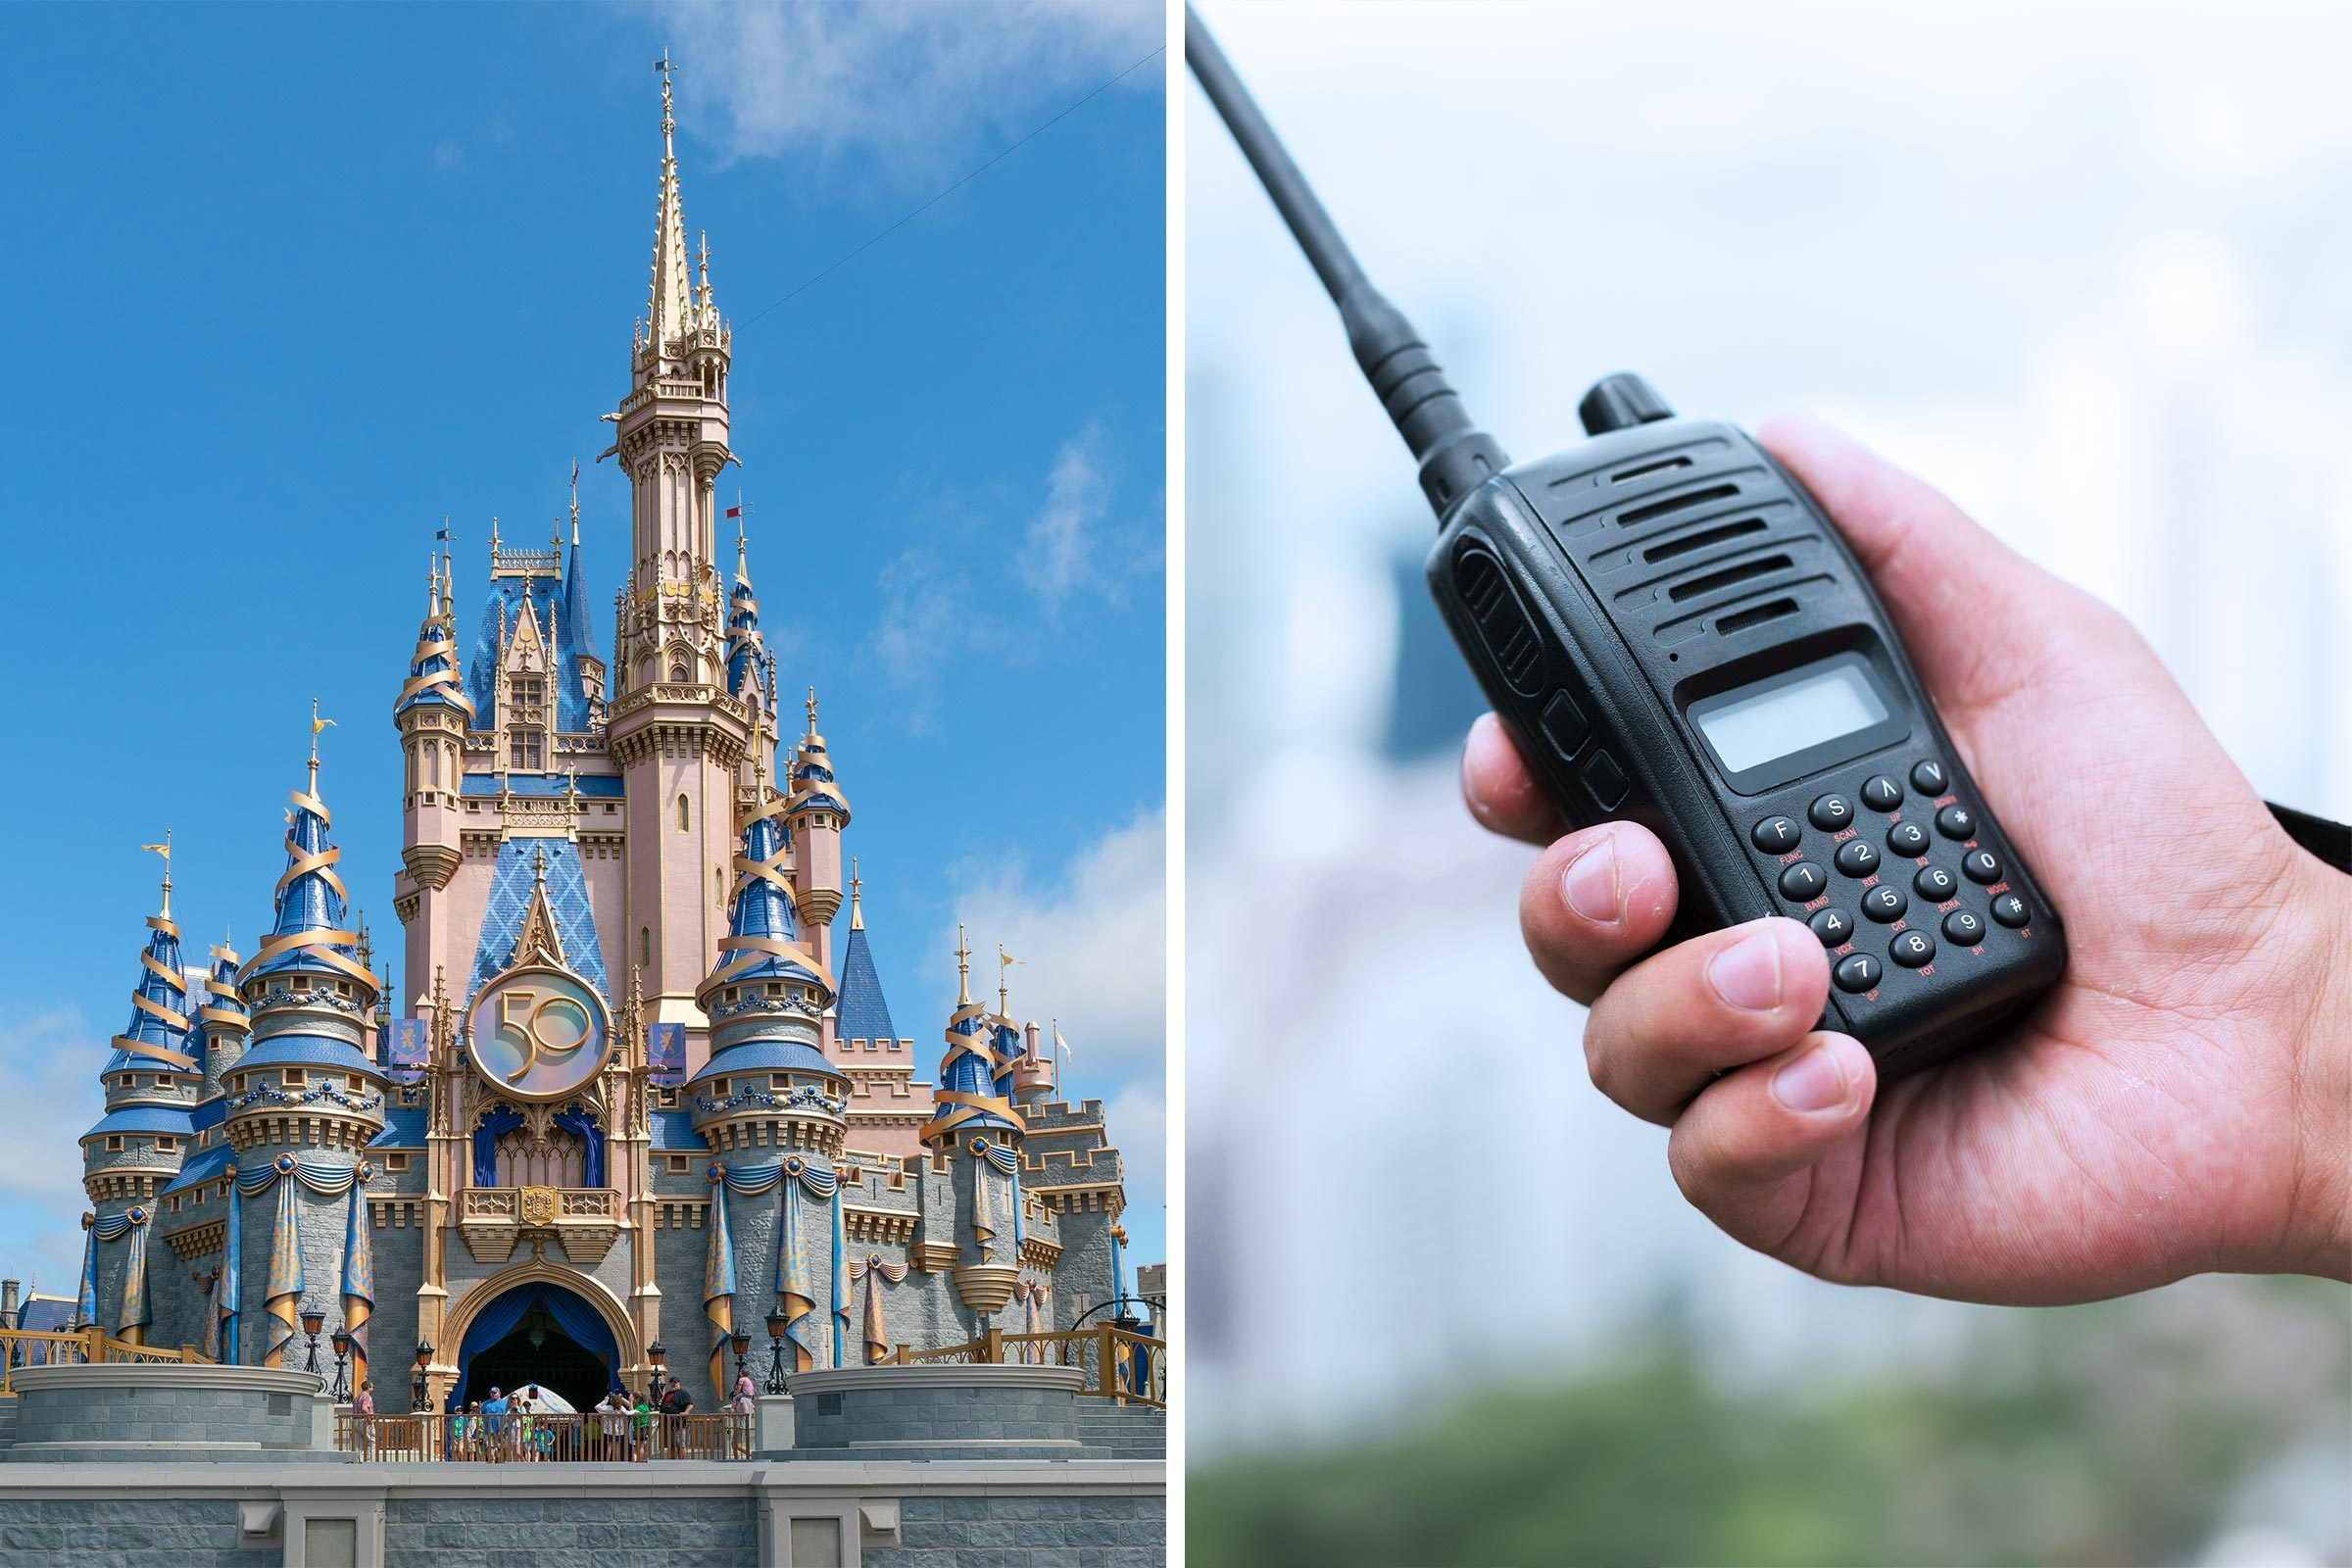 side by side of magic castle at Disney world and an employee holding a walkie talkie radio saying a code word